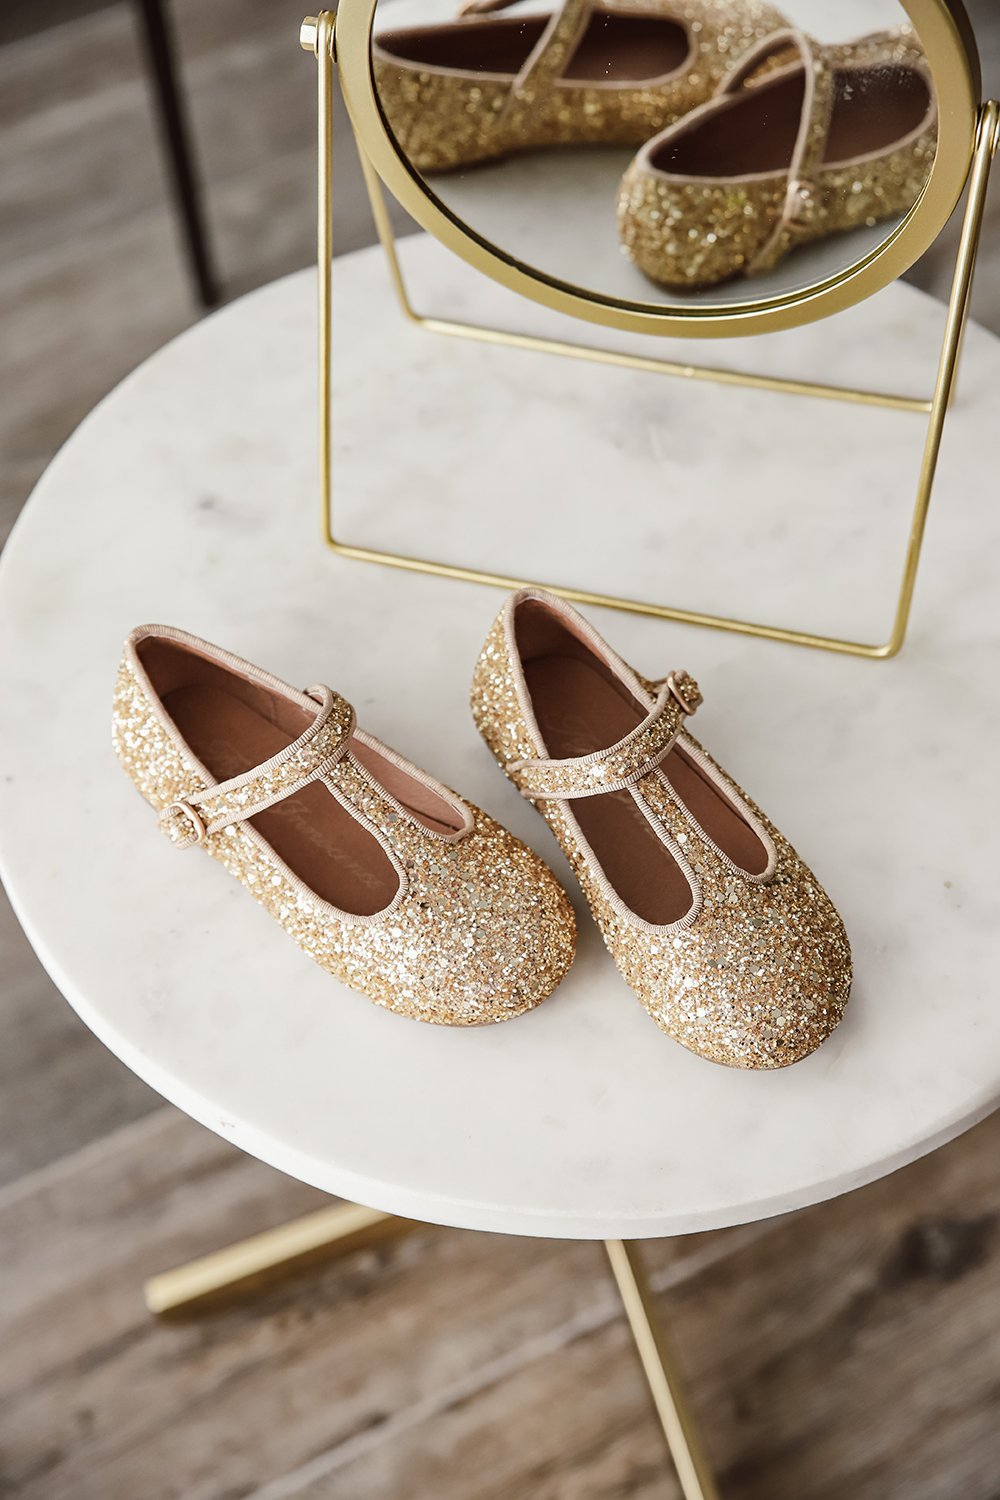 Abigail Glitter Gold Shoes by Age of Innocence